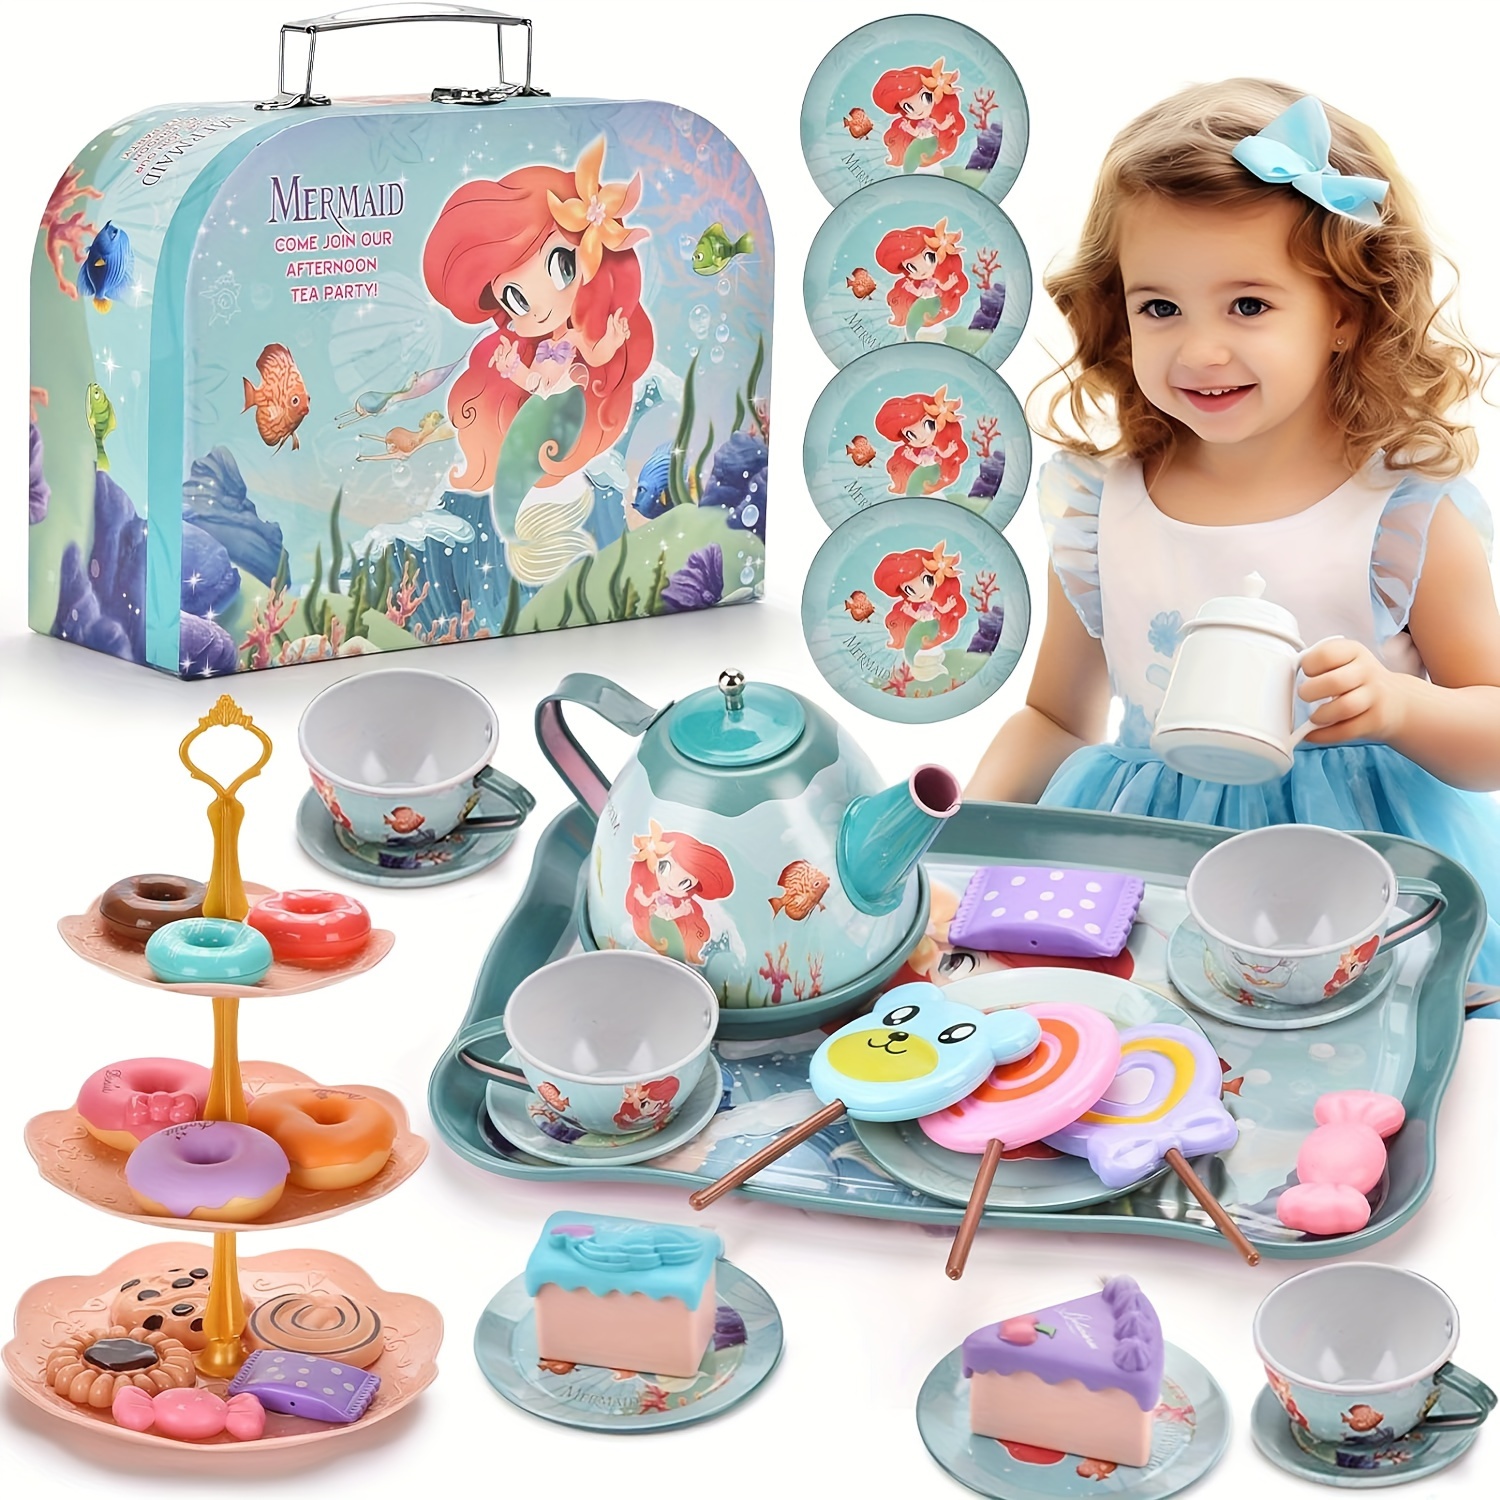 

Mermaid Tea Party Playset - 48pcs Including Tin Teapot, Cups, Plates & Food - Ideal Birthday Gift For Young Youngsters, Princess Tea Time Play Kitchen Toys